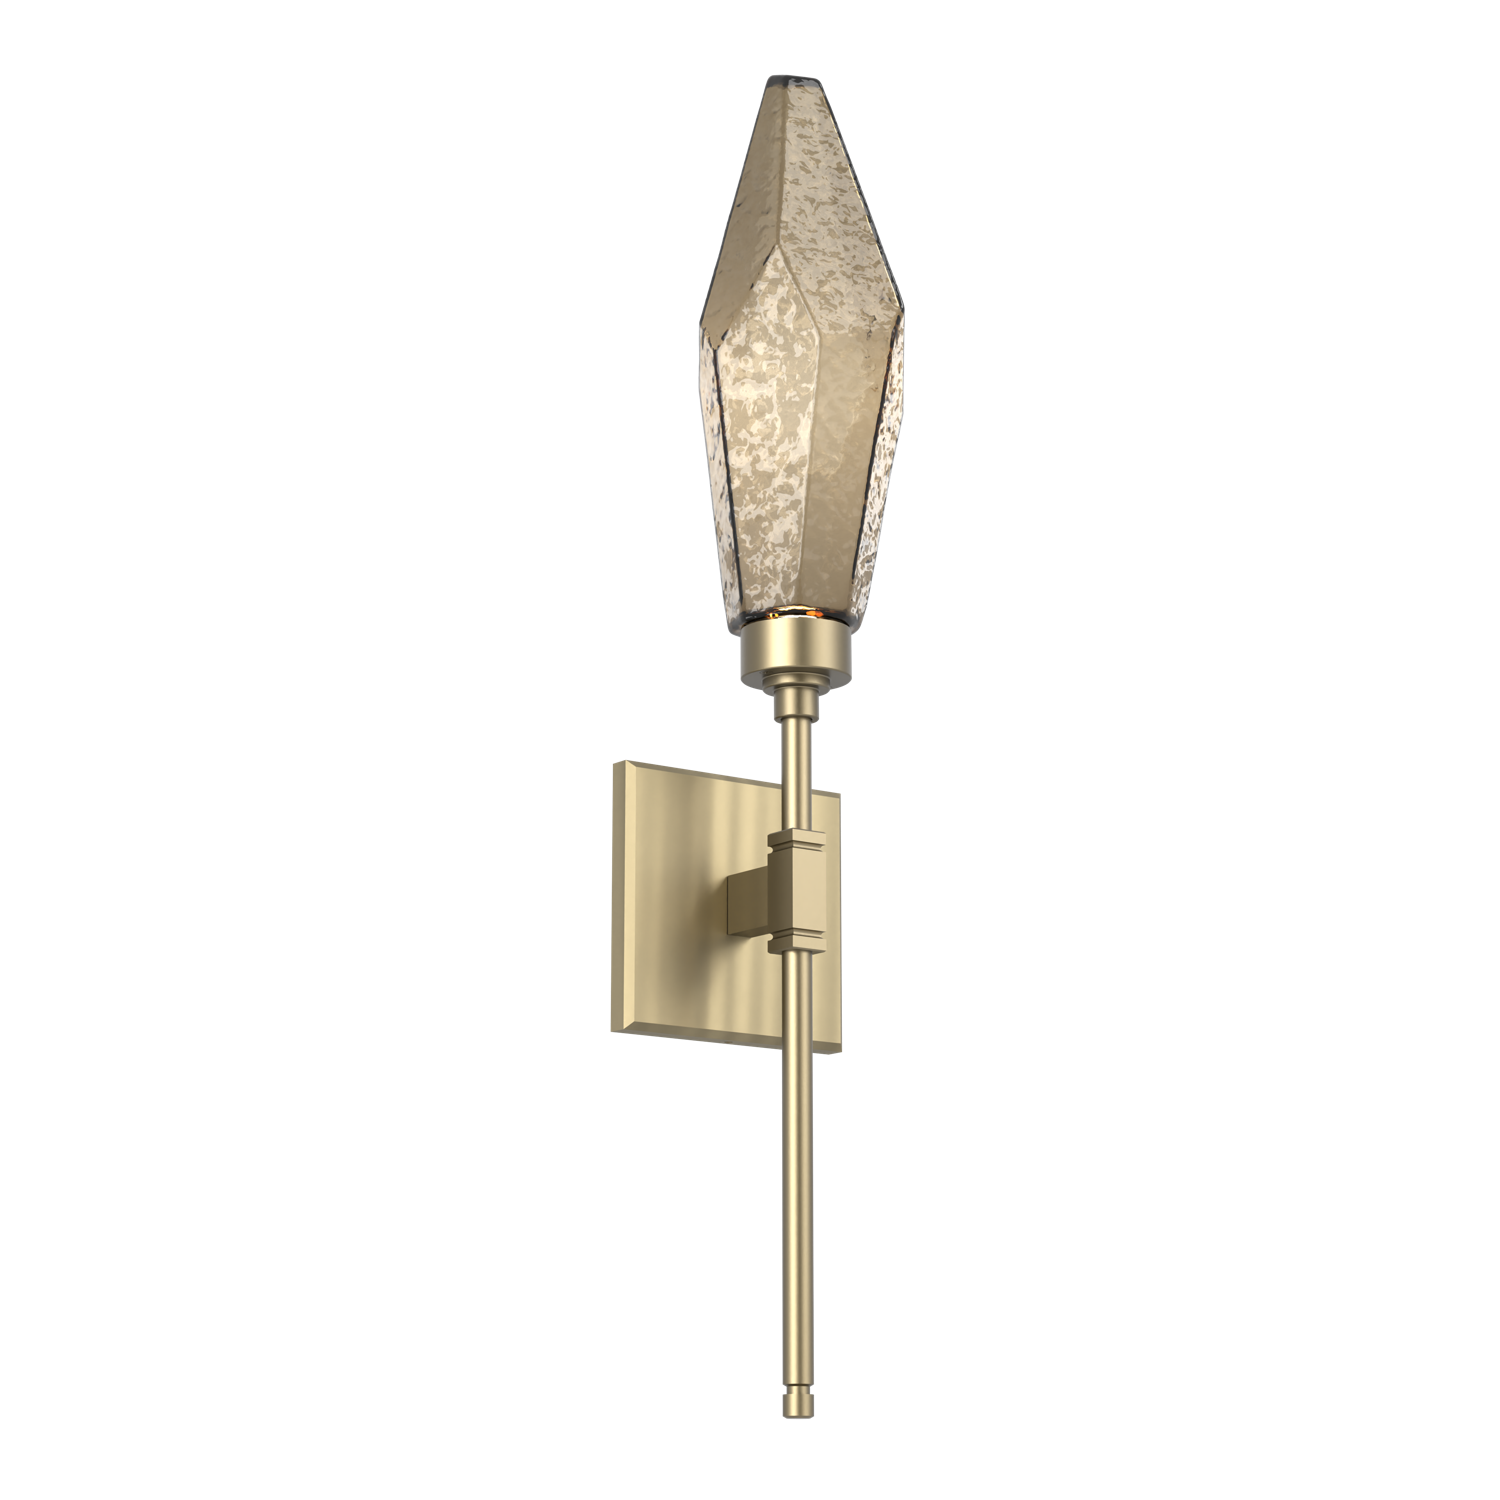 IDB0050-04-HB-CB-Hammerton-Studio-Rock-Crystal-ada-certified-belvedere-wall-sconce-with-heritage-brass-finish-and-chilled-bronze-blown-glass-shades-and-LED-lamping